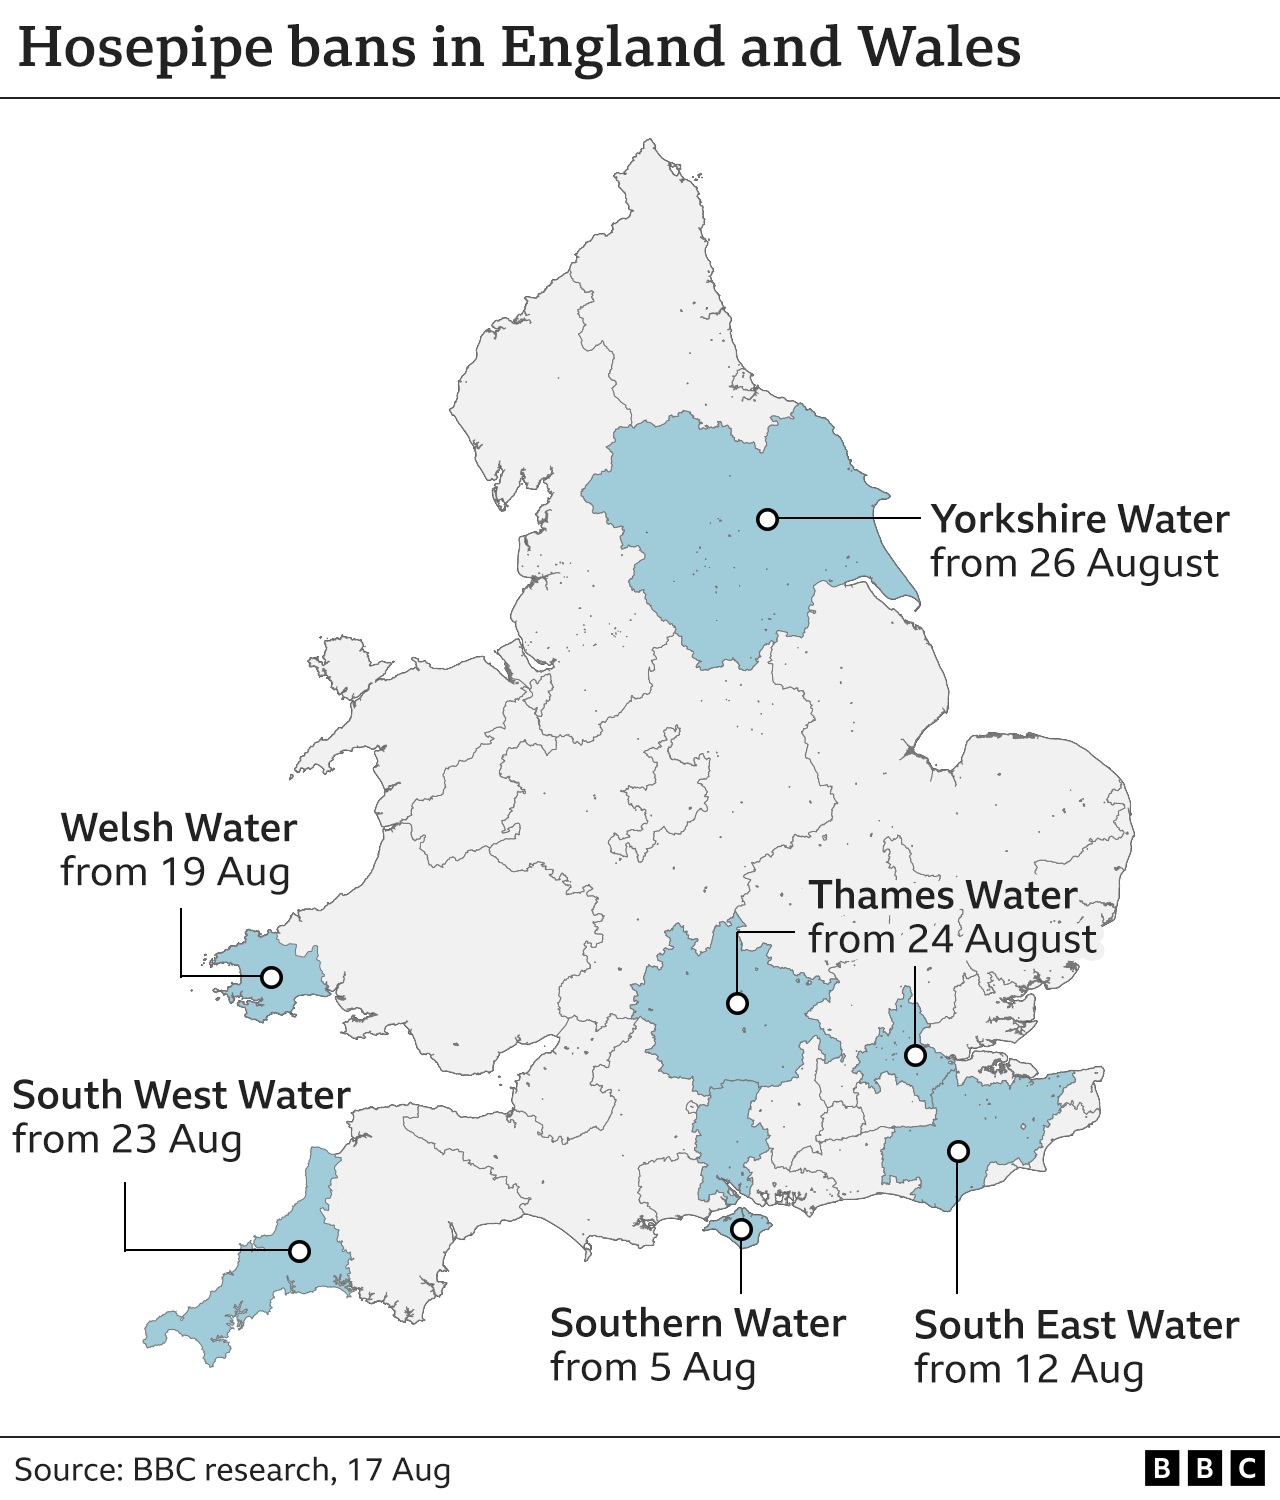 Map showing areas with hosepipe bans, as of 17 August